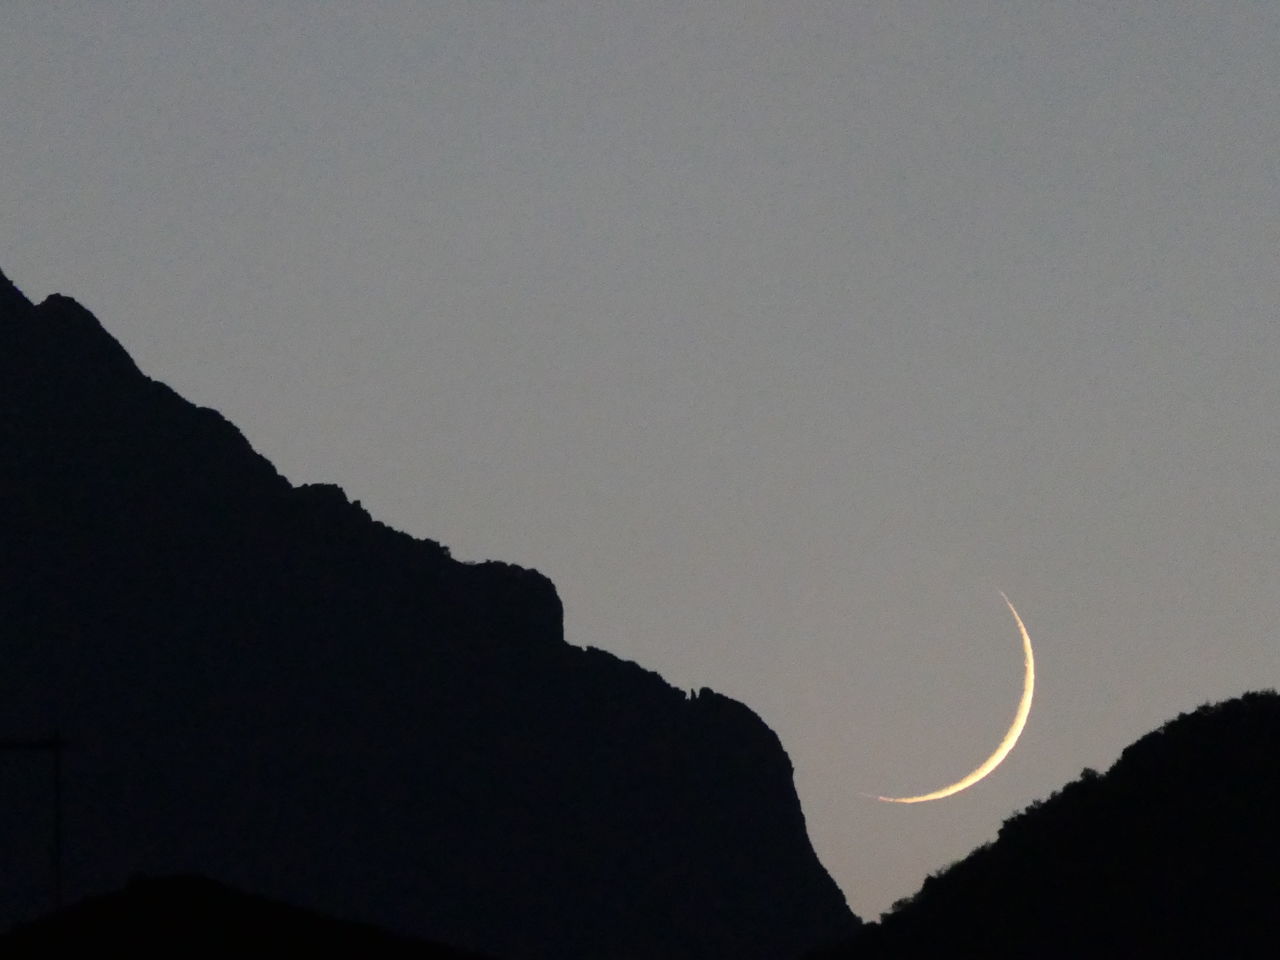 crescent, sky, silhouette, beauty in nature, moon, scenics - nature, nature, night, mountain, space, no people, tranquility, tranquil scene, astronomy, cloud, outdoors, eclipse, copy space, astronomical object, low angle view, environment